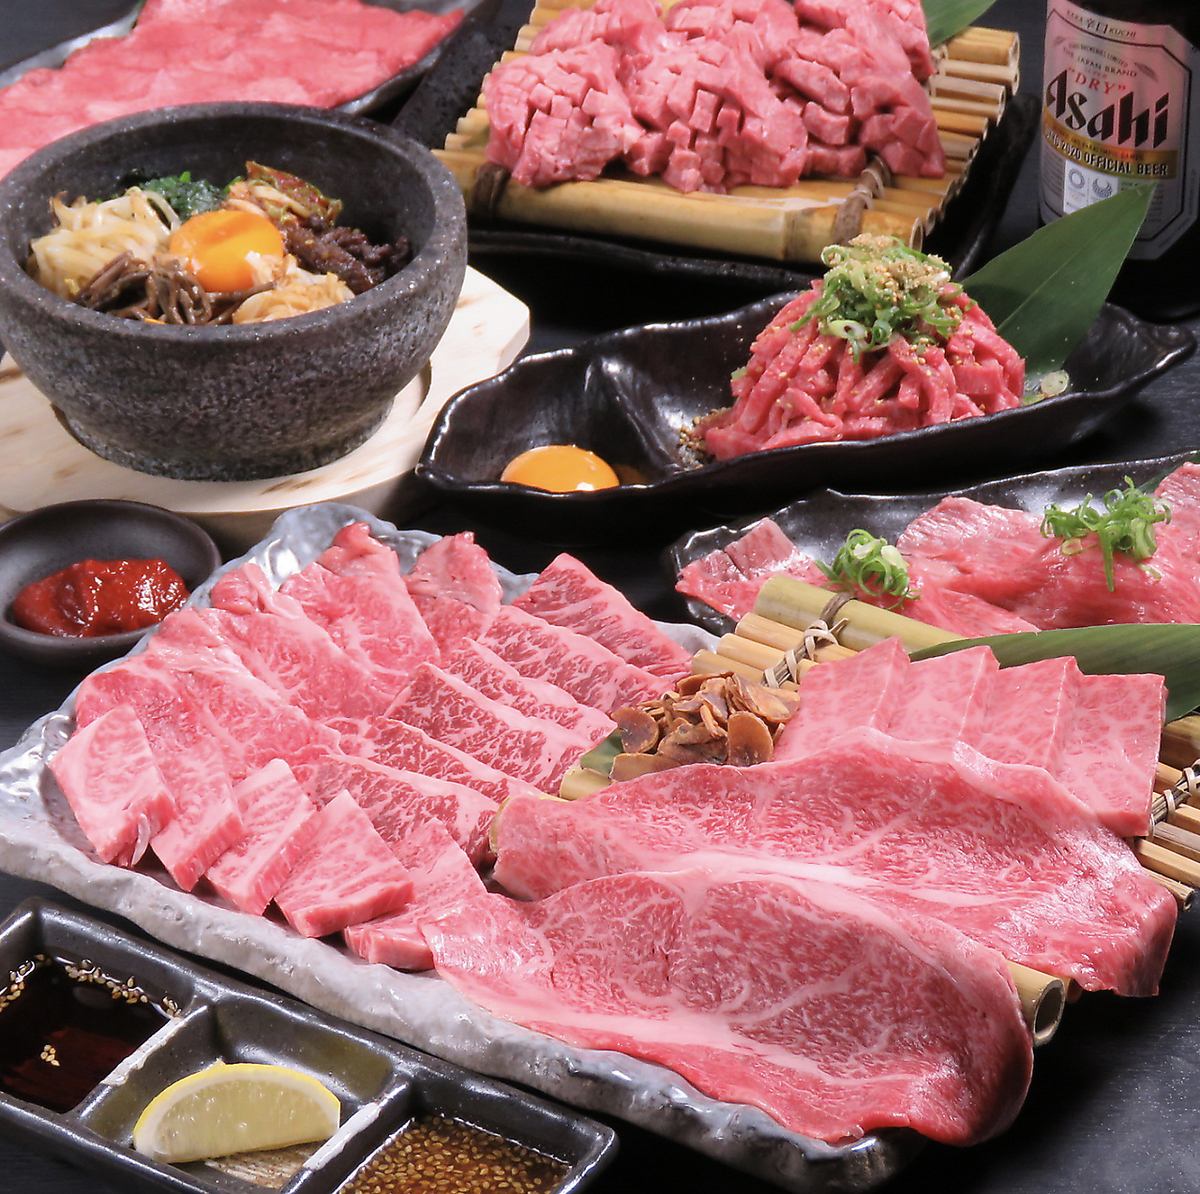 The charm of Ushio is that you can eat Japanese black beef and high-class meat at this price!